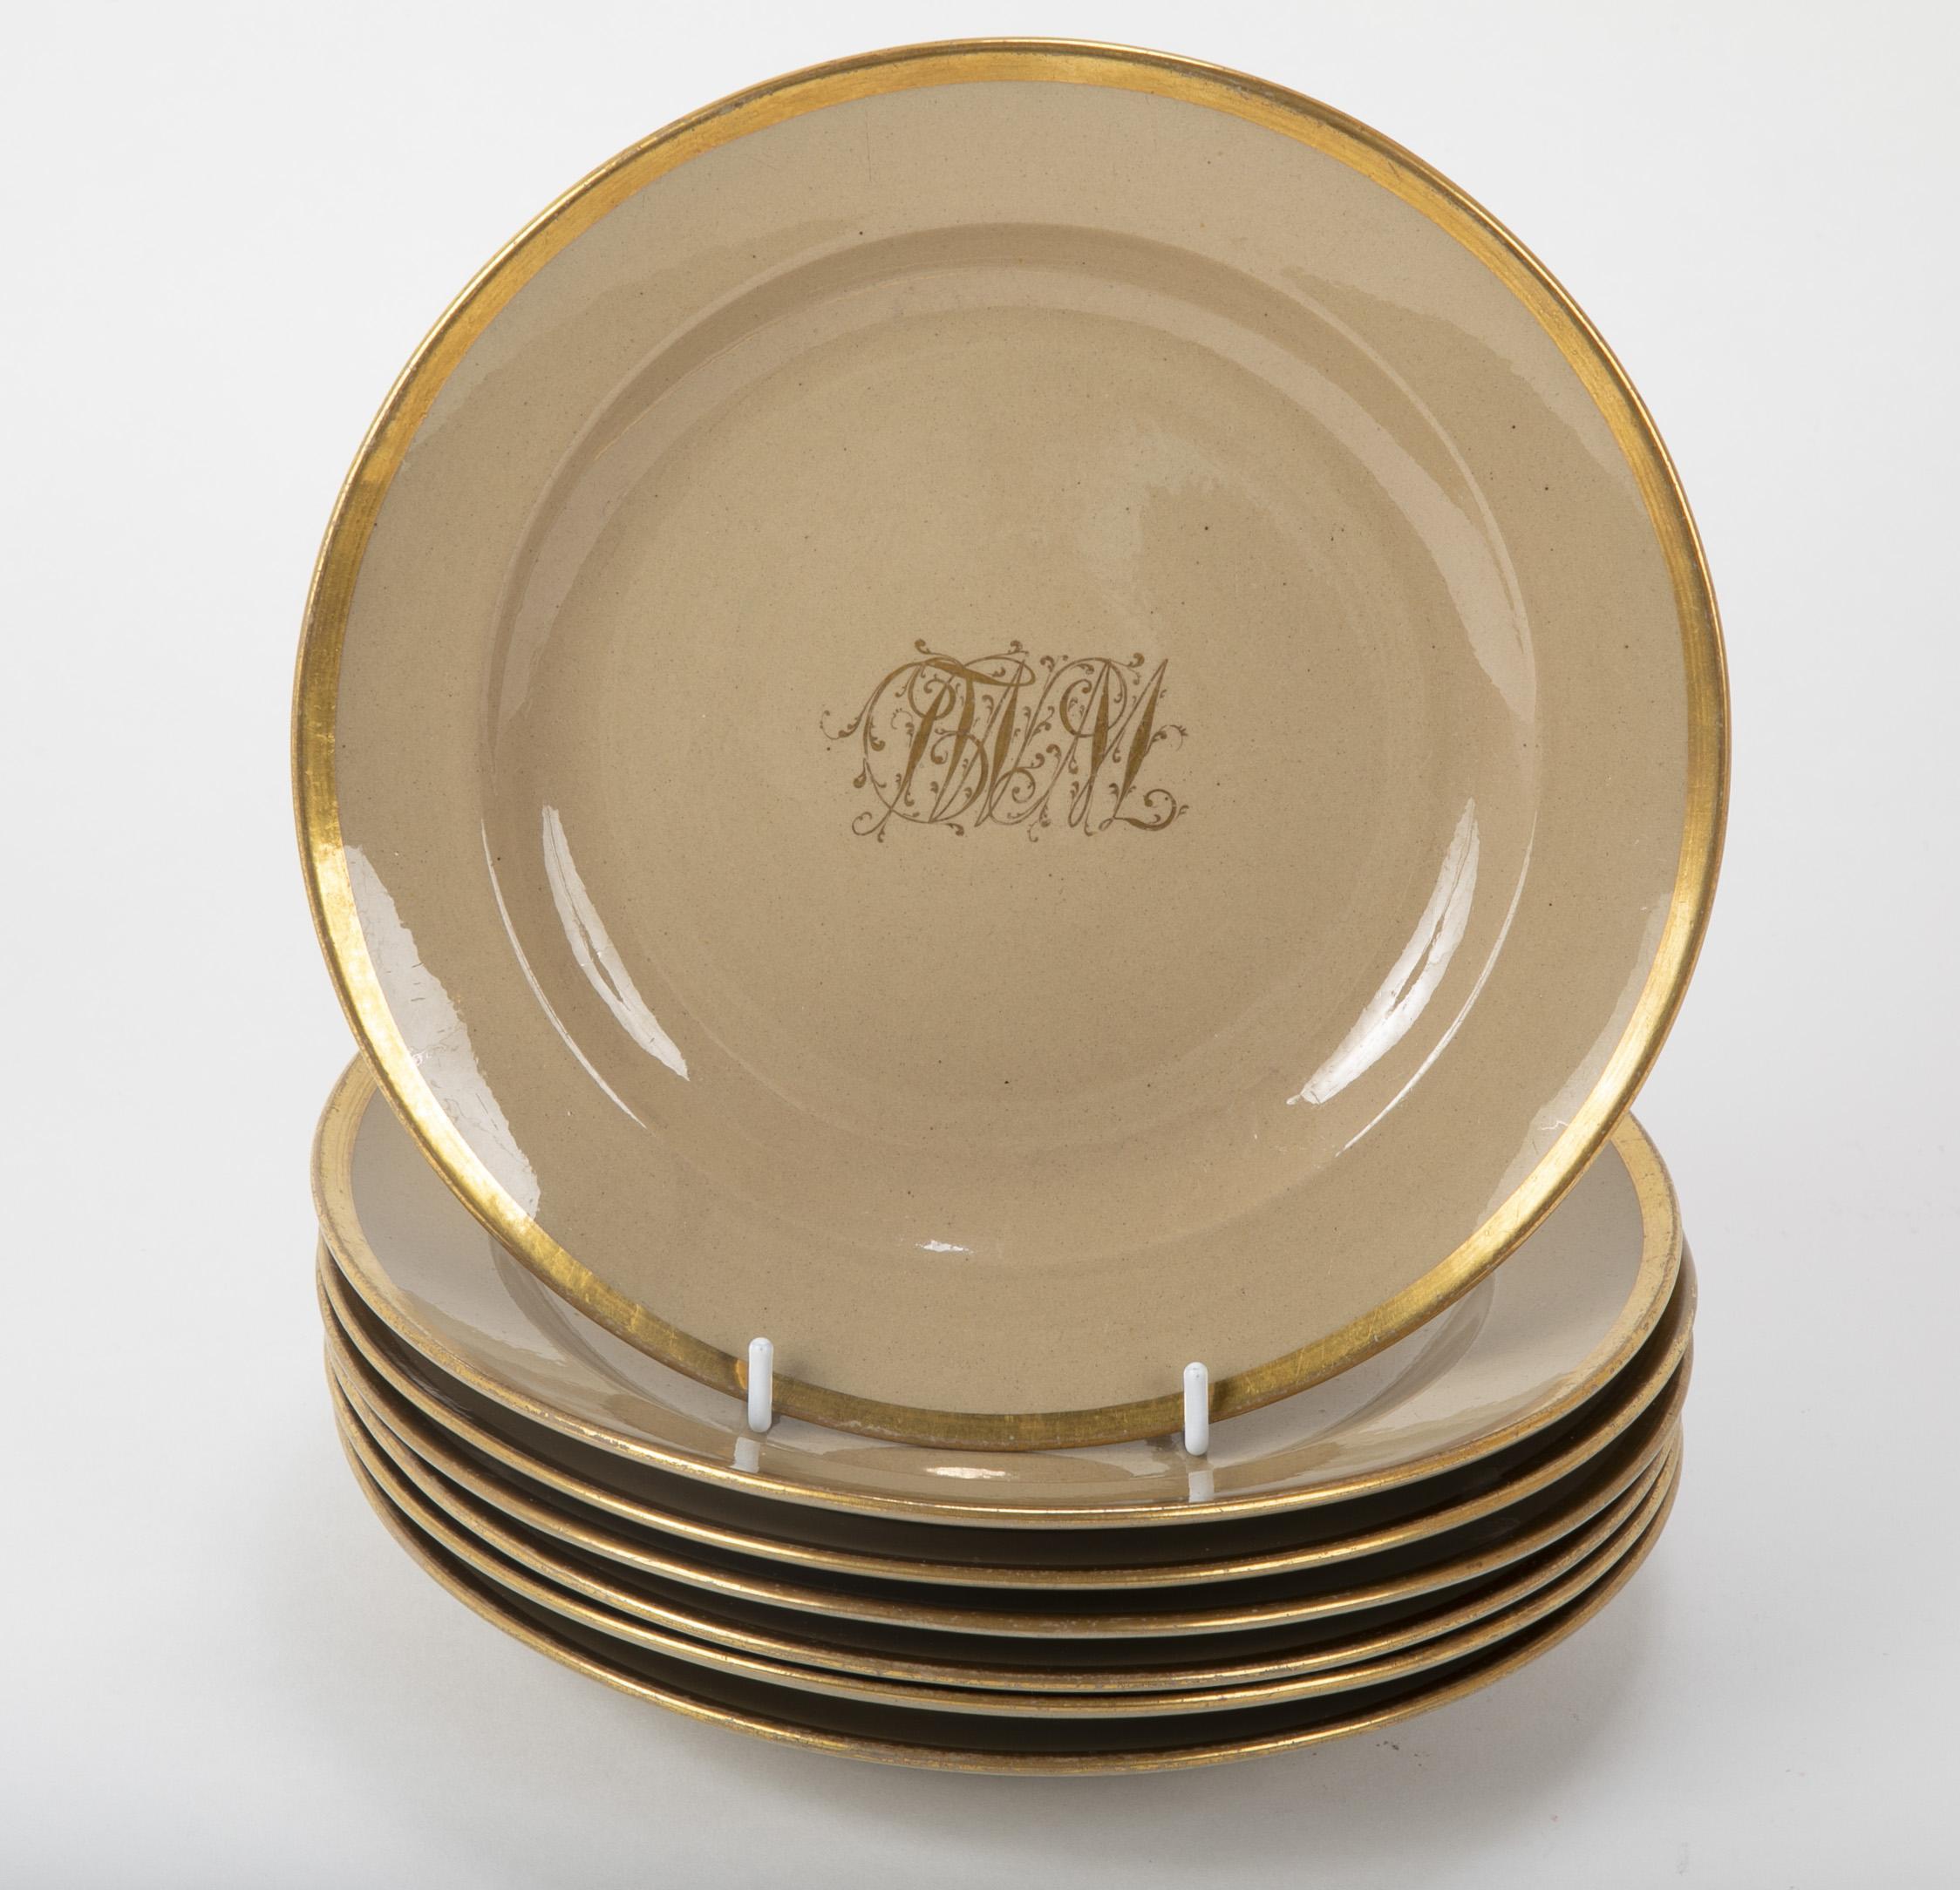 A set of Drabware plates presumed to be English.